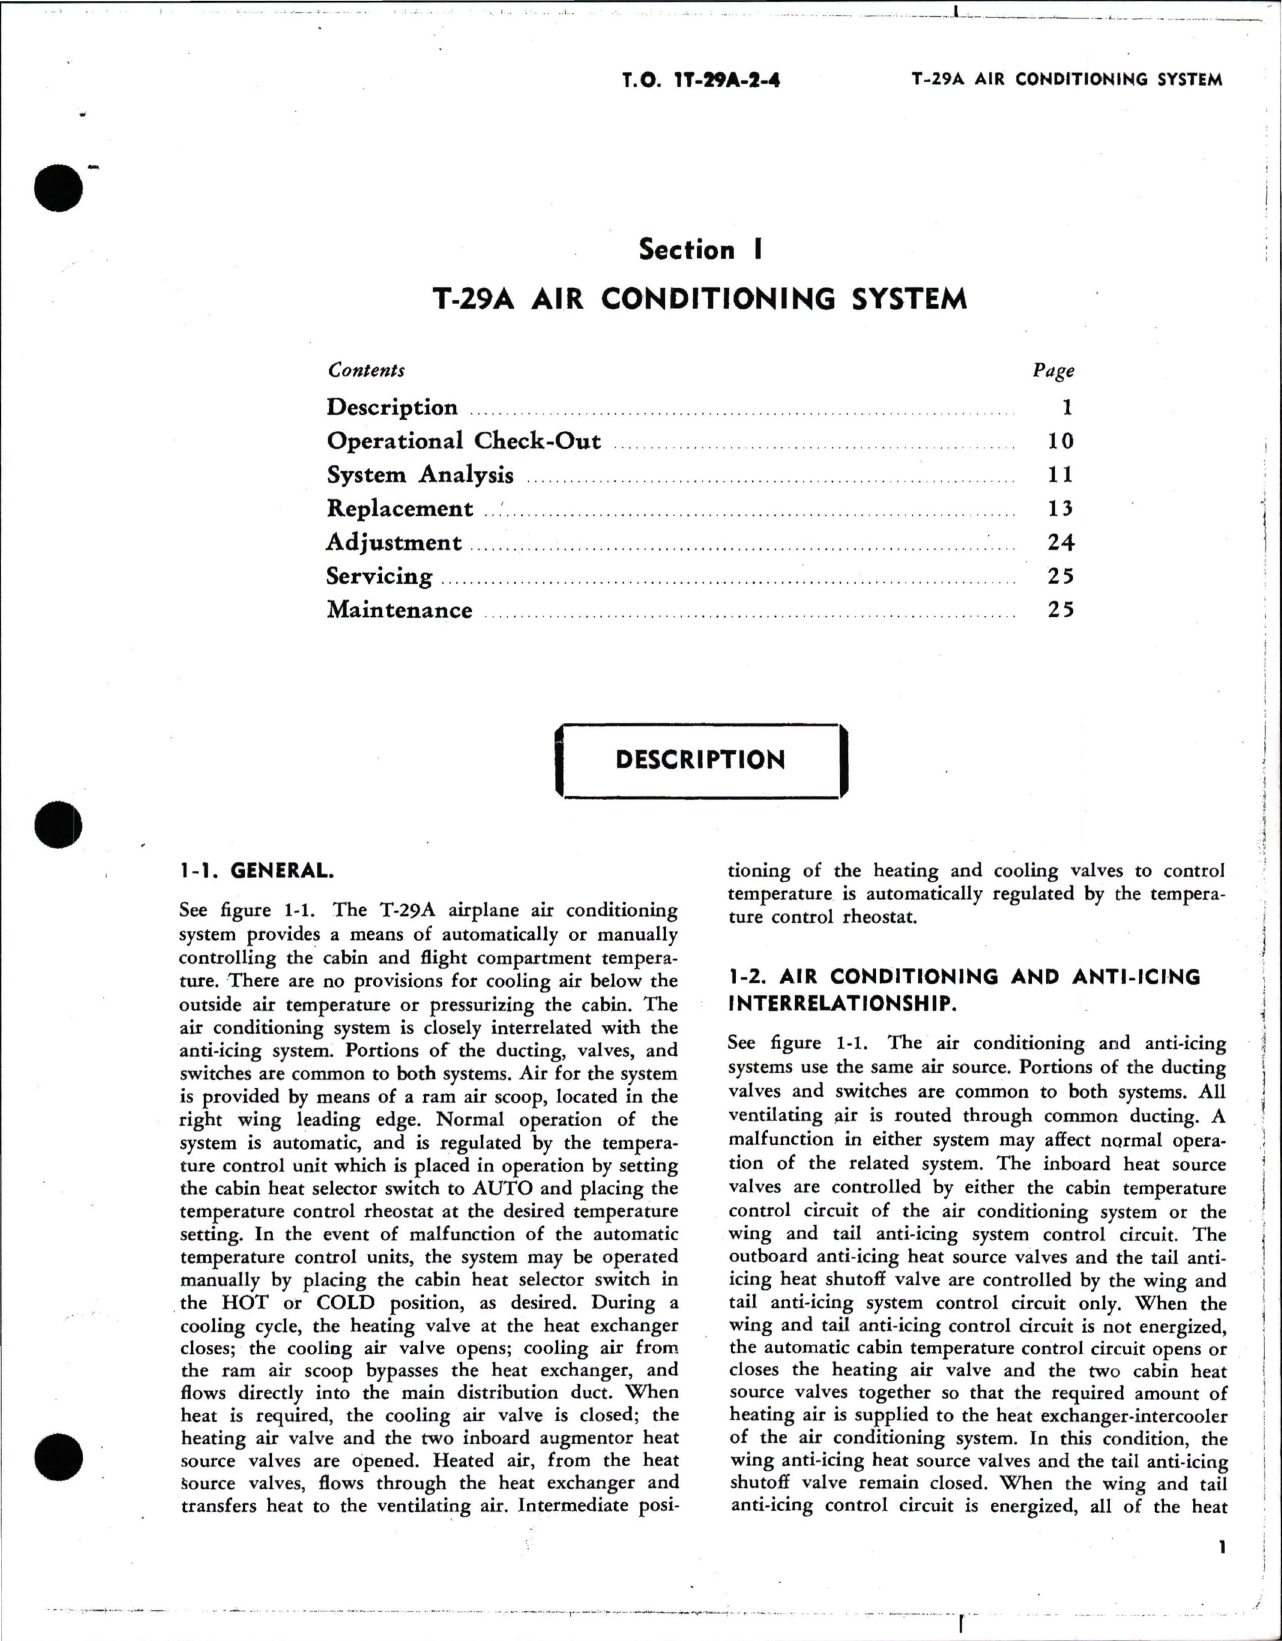 Sample page 9 from AirCorps Library document: Maintenance Manual for Utility Systems for T-29A, T-29B, T-29C, and T-29D